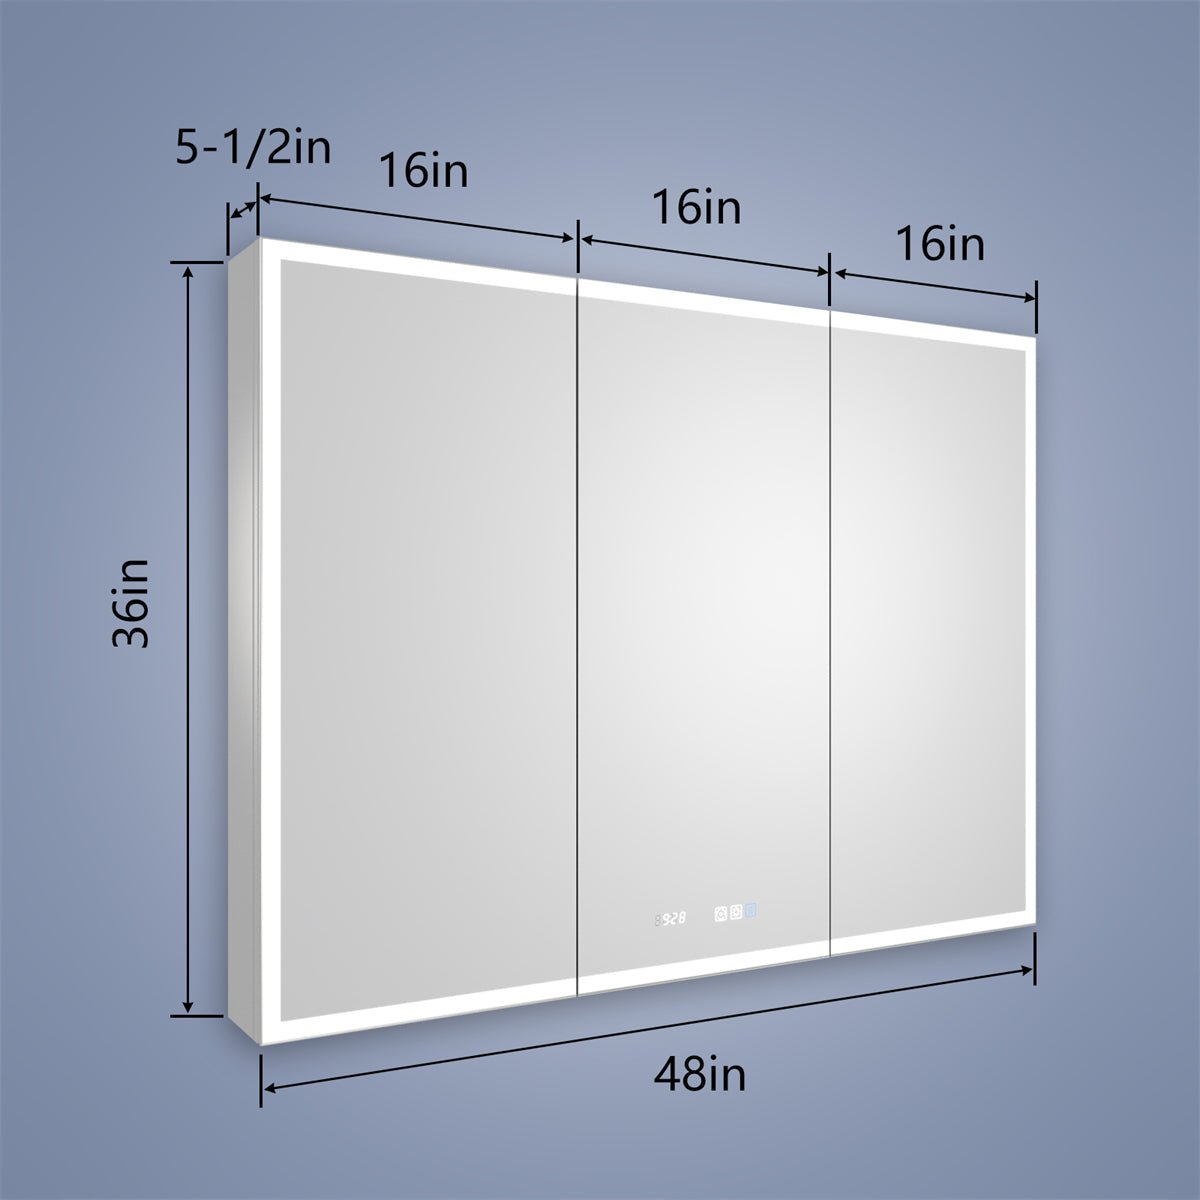 Rim 48" W x 36" H Led Lighted Medicine Cabinet Recessed or Surface with Clock and mirrors - ExBriteUSA